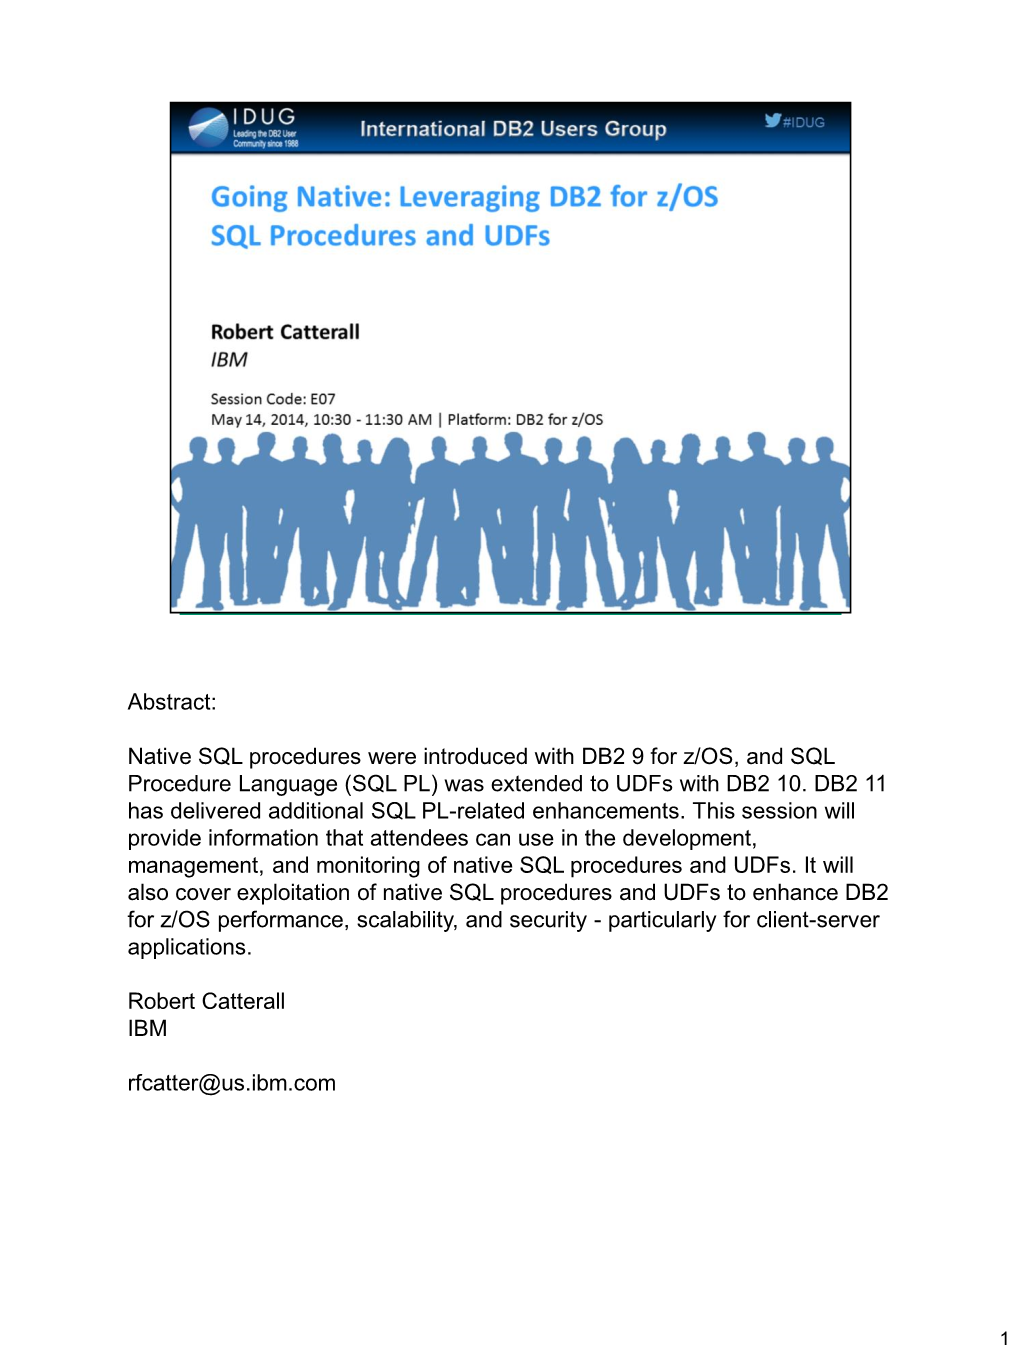 Going Native: Leveraging DB2 for Z/OS SQL Procedures and Udfs